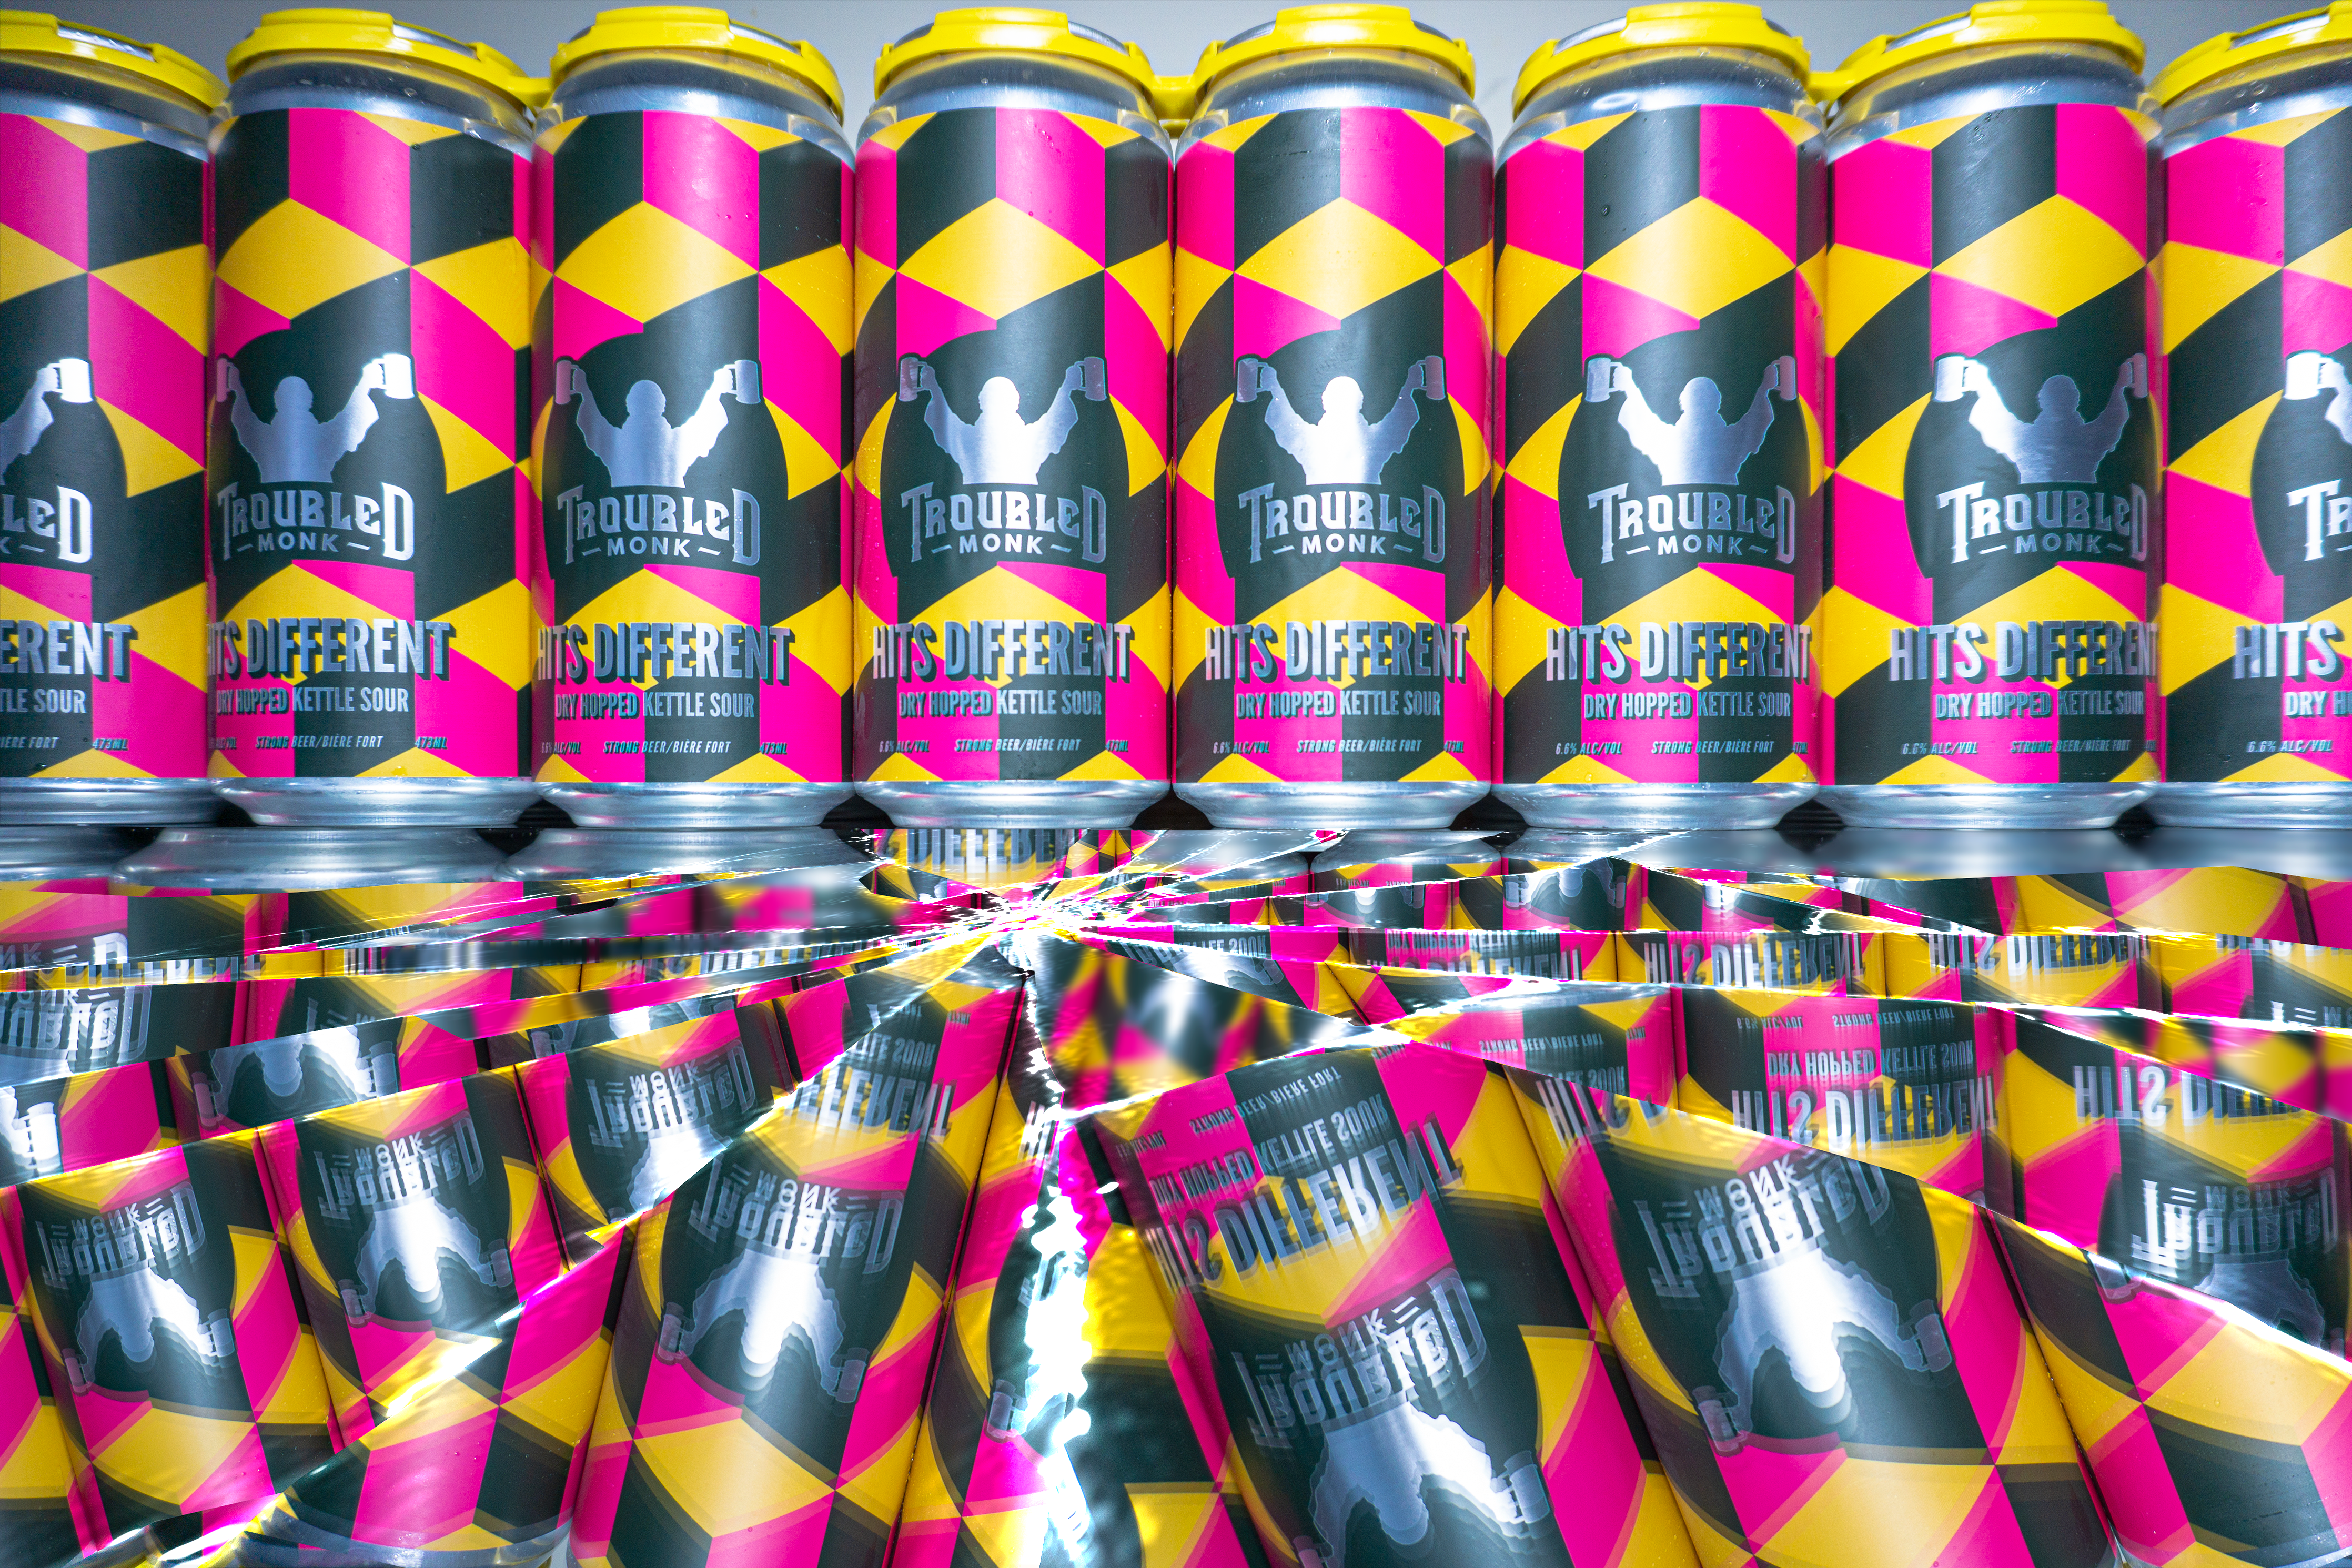 Hits different cans with a qbert pattern of yellow. pink and black